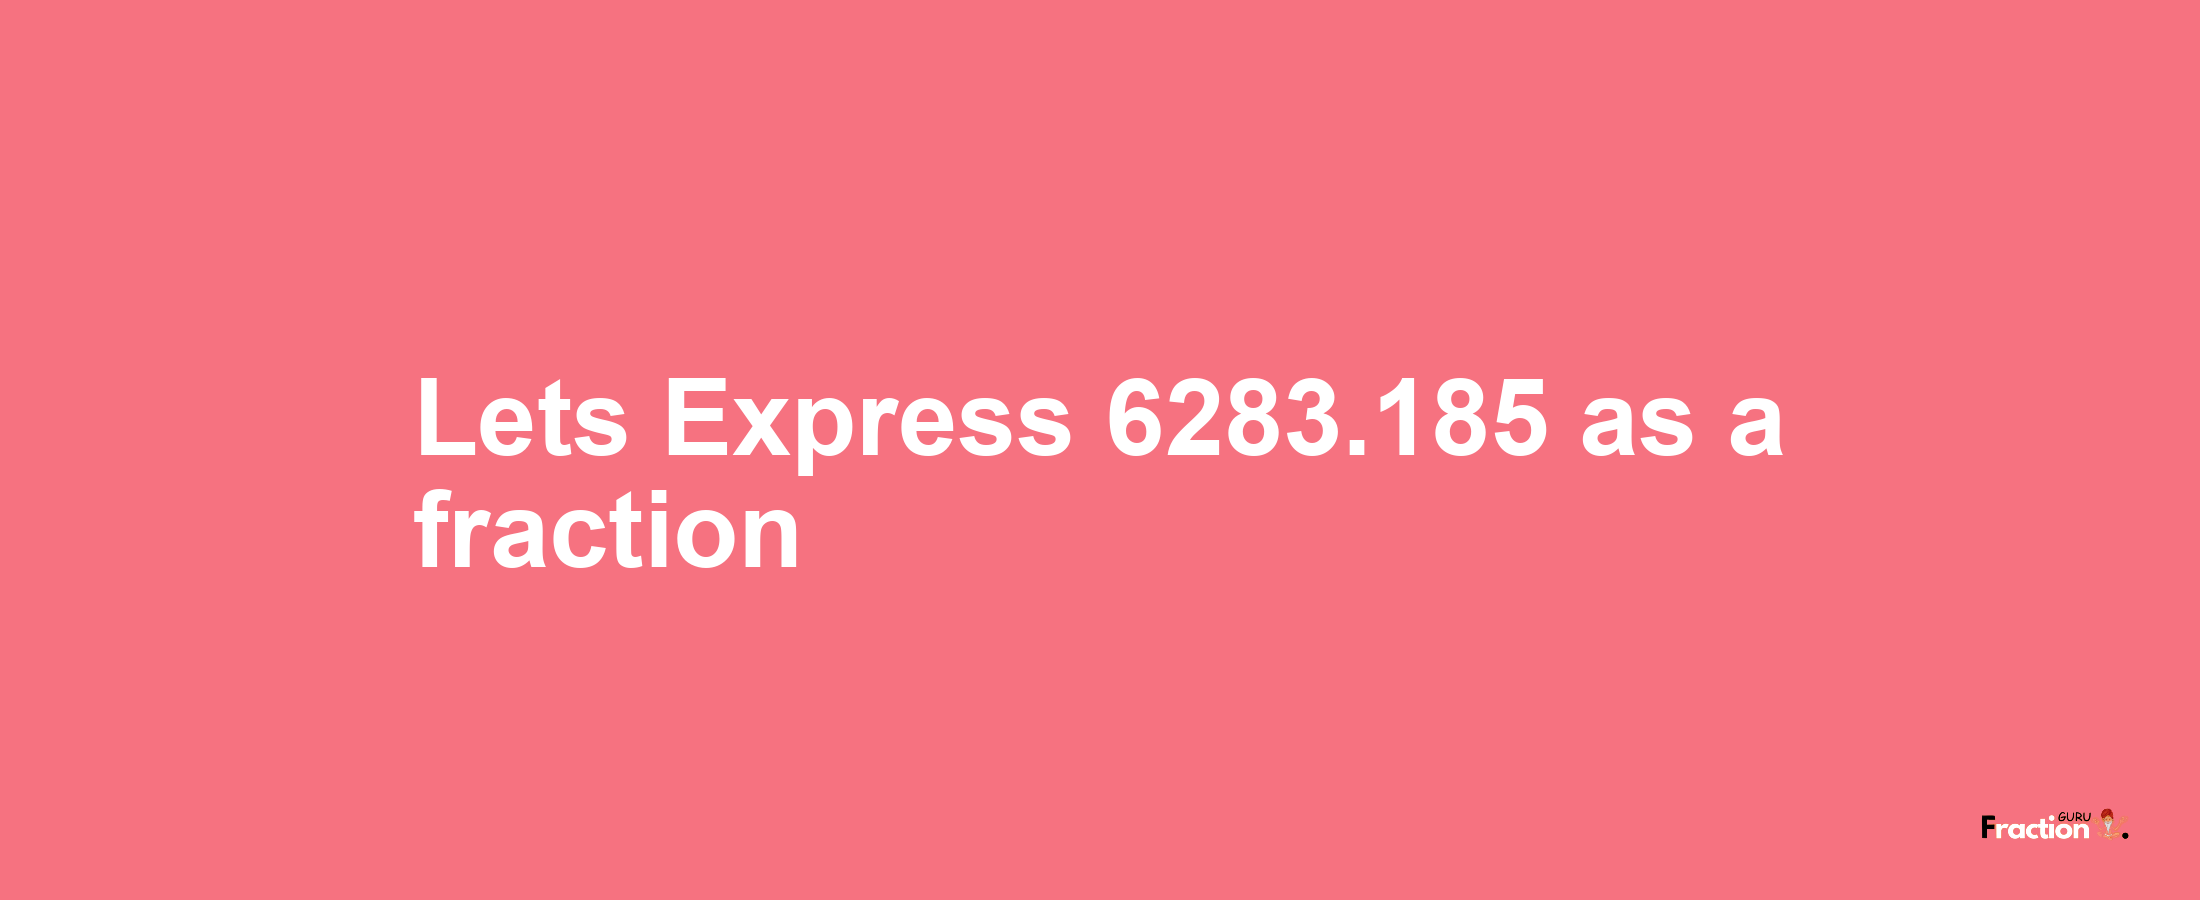 Lets Express 6283.185 as afraction